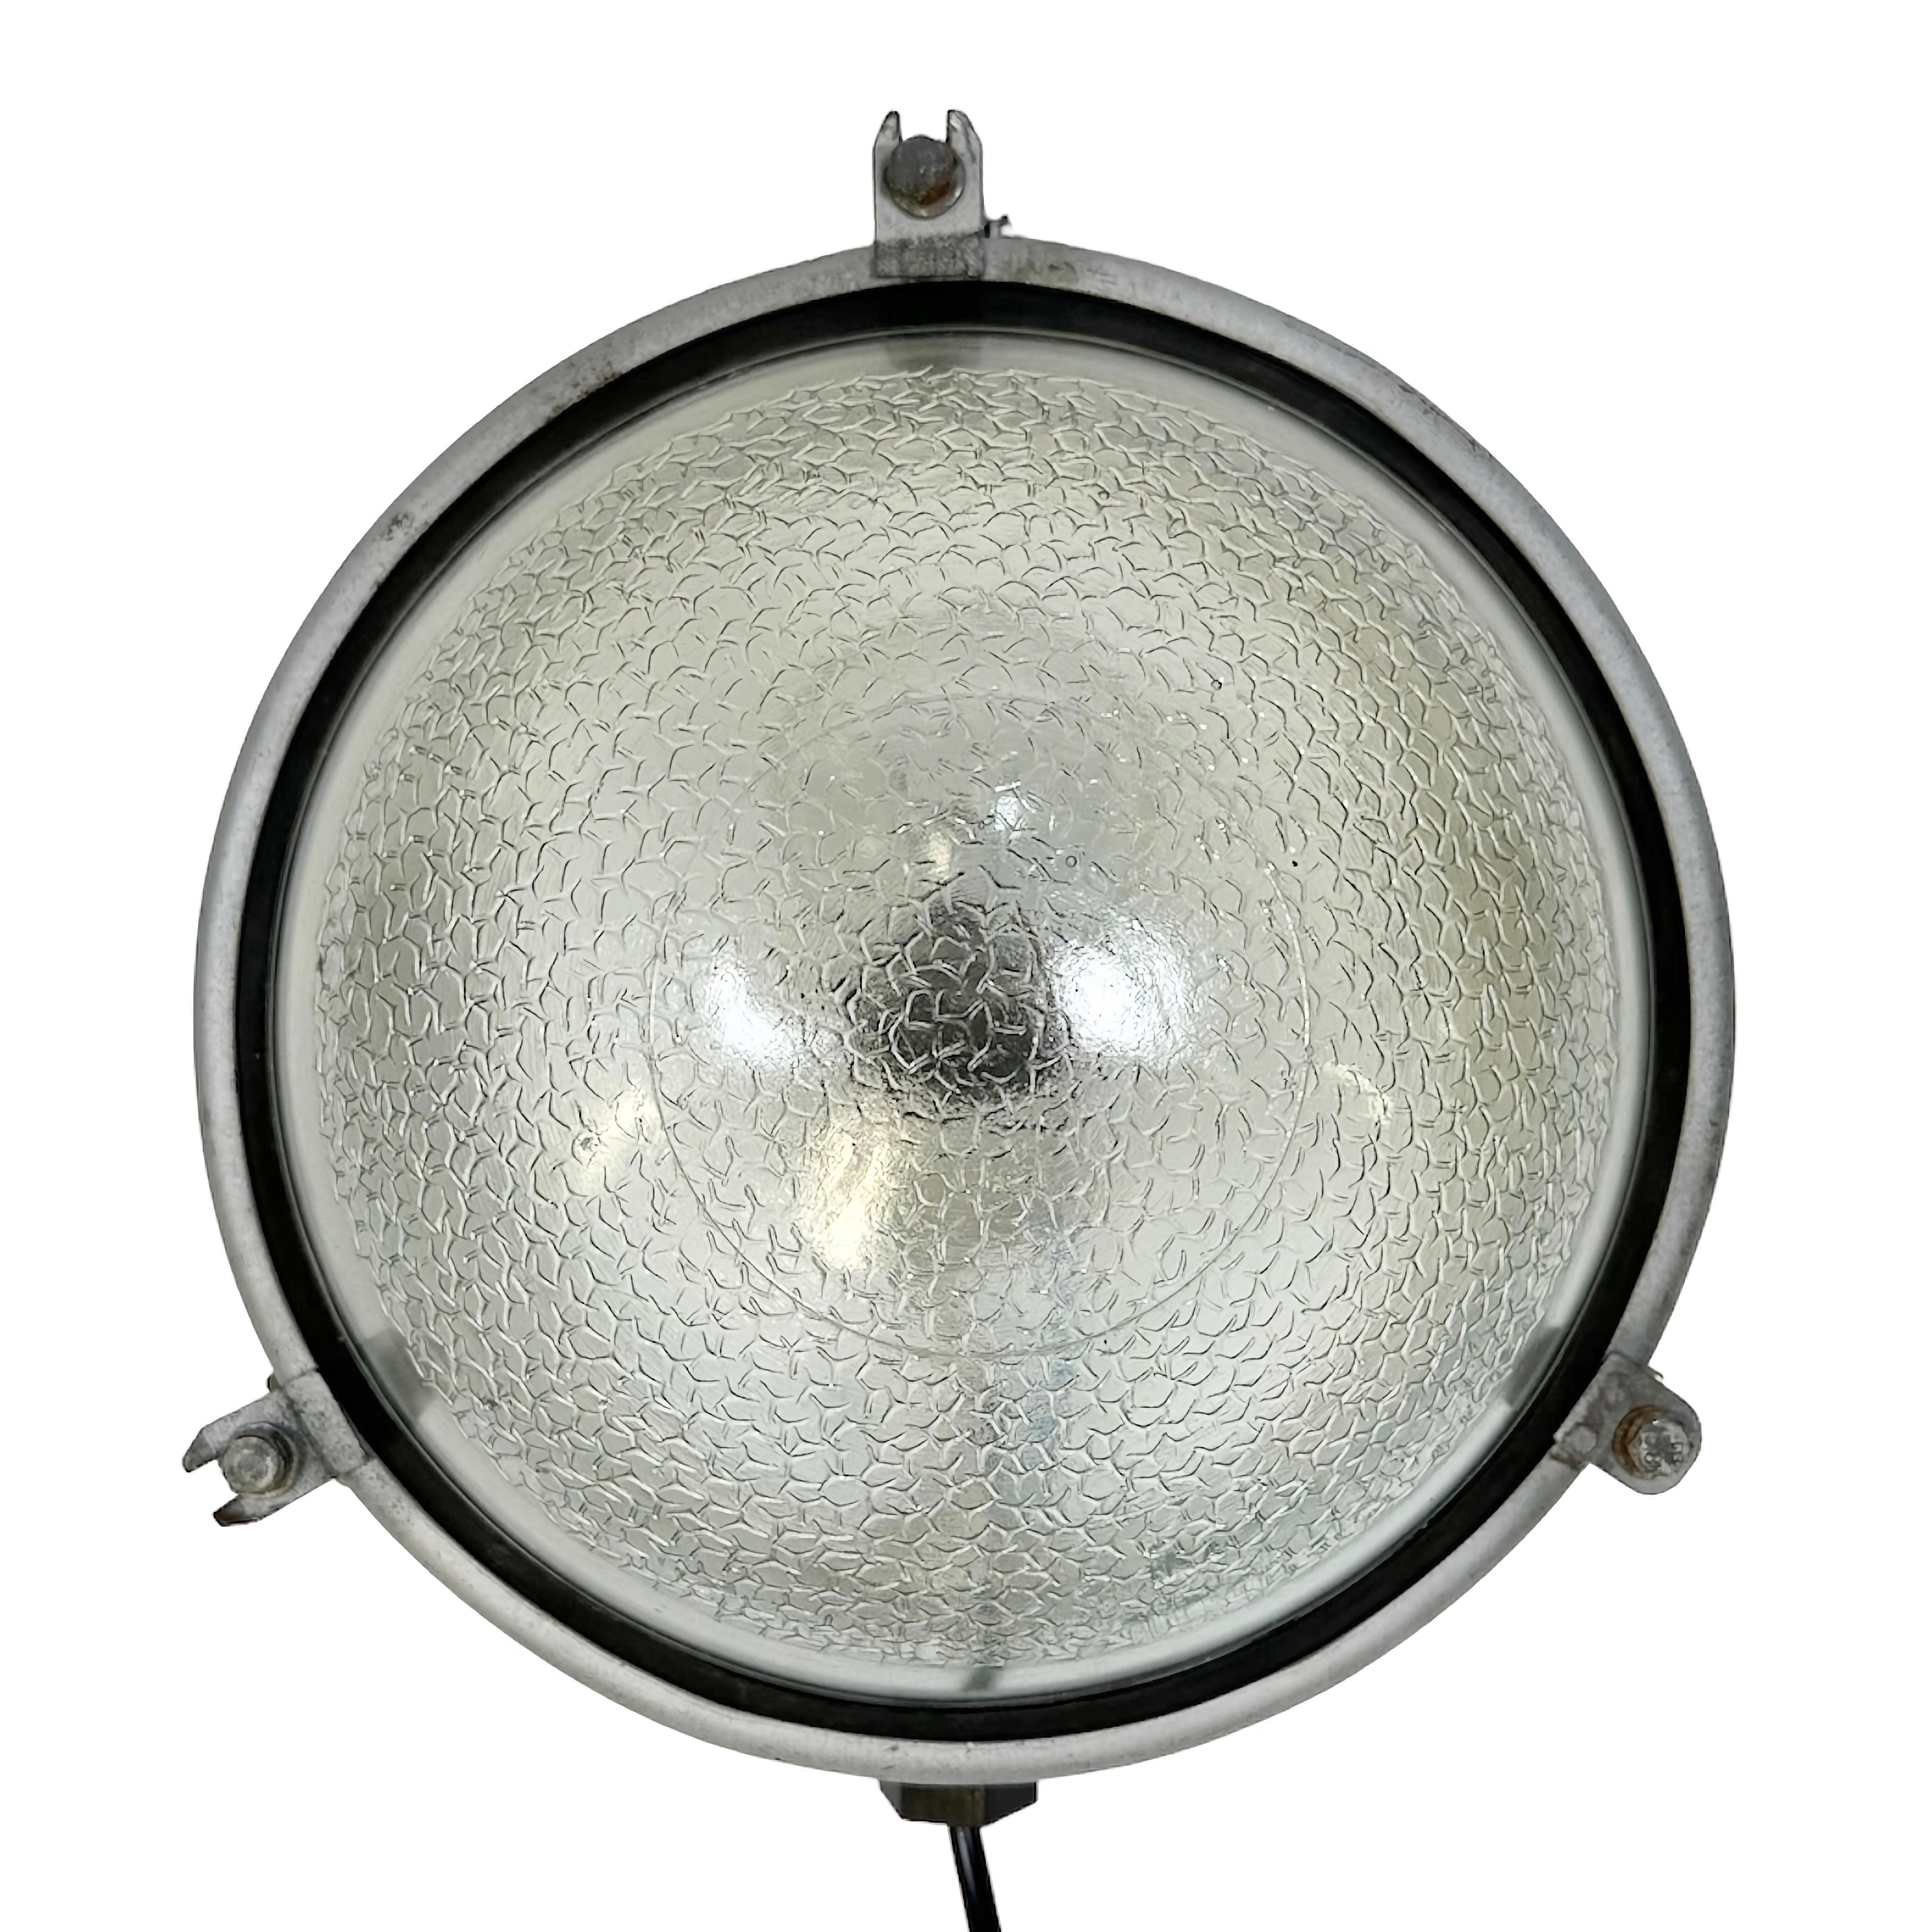 Industrial wall light made in former Soviet Union during the 1970s. It features a grey metal body and a frosted glass cover. The porcelain sockets requires E 27/E 26 light bulbs. New wire. The weight of the lamp is 2kg. The light can be also used as